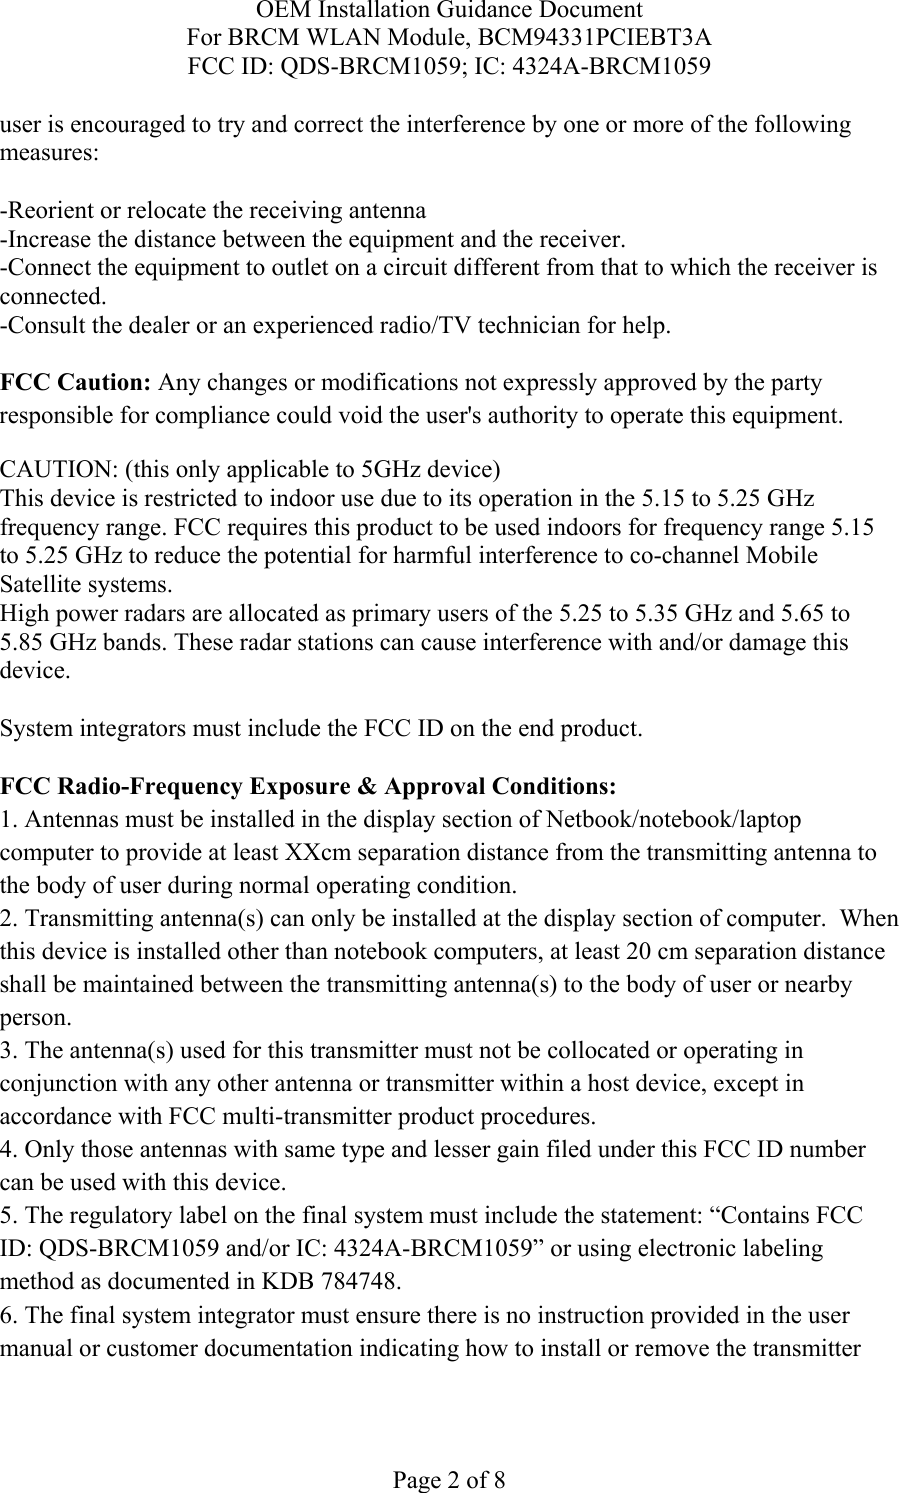 OEM Installation Guidance Document For BRCM WLAN Module, BCM94331PCIEBT3A FCC ID: QDS-BRCM1059; IC: 4324A-BRCM1059  Page 2 of 8 user is encouraged to try and correct the interference by one or more of the following measures:   -Reorient or relocate the receiving antenna -Increase the distance between the equipment and the receiver. -Connect the equipment to outlet on a circuit different from that to which the receiver is connected. -Consult the dealer or an experienced radio/TV technician for help.  FCC Caution: Any changes or modifications not expressly approved by the party responsible for compliance could void the user&apos;s authority to operate this equipment. CAUTION: (this only applicable to 5GHz device) This device is restricted to indoor use due to its operation in the 5.15 to 5.25 GHz frequency range. FCC requires this product to be used indoors for frequency range 5.15 to 5.25 GHz to reduce the potential for harmful interference to co-channel Mobile Satellite systems. High power radars are allocated as primary users of the 5.25 to 5.35 GHz and 5.65 to 5.85 GHz bands. These radar stations can cause interference with and/or damage this device.  System integrators must include the FCC ID on the end product.   FCC Radio-Frequency Exposure &amp; Approval Conditions: 1. Antennas must be installed in the display section of Netbook/notebook/laptop computer to provide at least XXcm separation distance from the transmitting antenna to the body of user during normal operating condition. 2. Transmitting antenna(s) can only be installed at the display section of computer.  When this device is installed other than notebook computers, at least 20 cm separation distance shall be maintained between the transmitting antenna(s) to the body of user or nearby person. 3. The antenna(s) used for this transmitter must not be collocated or operating in conjunction with any other antenna or transmitter within a host device, except in accordance with FCC multi-transmitter product procedures. 4. Only those antennas with same type and lesser gain filed under this FCC ID number can be used with this device. 5. The regulatory label on the final system must include the statement: “Contains FCC ID: QDS-BRCM1059 and/or IC: 4324A-BRCM1059” or using electronic labeling method as documented in KDB 784748. 6. The final system integrator must ensure there is no instruction provided in the user manual or customer documentation indicating how to install or remove the transmitter 